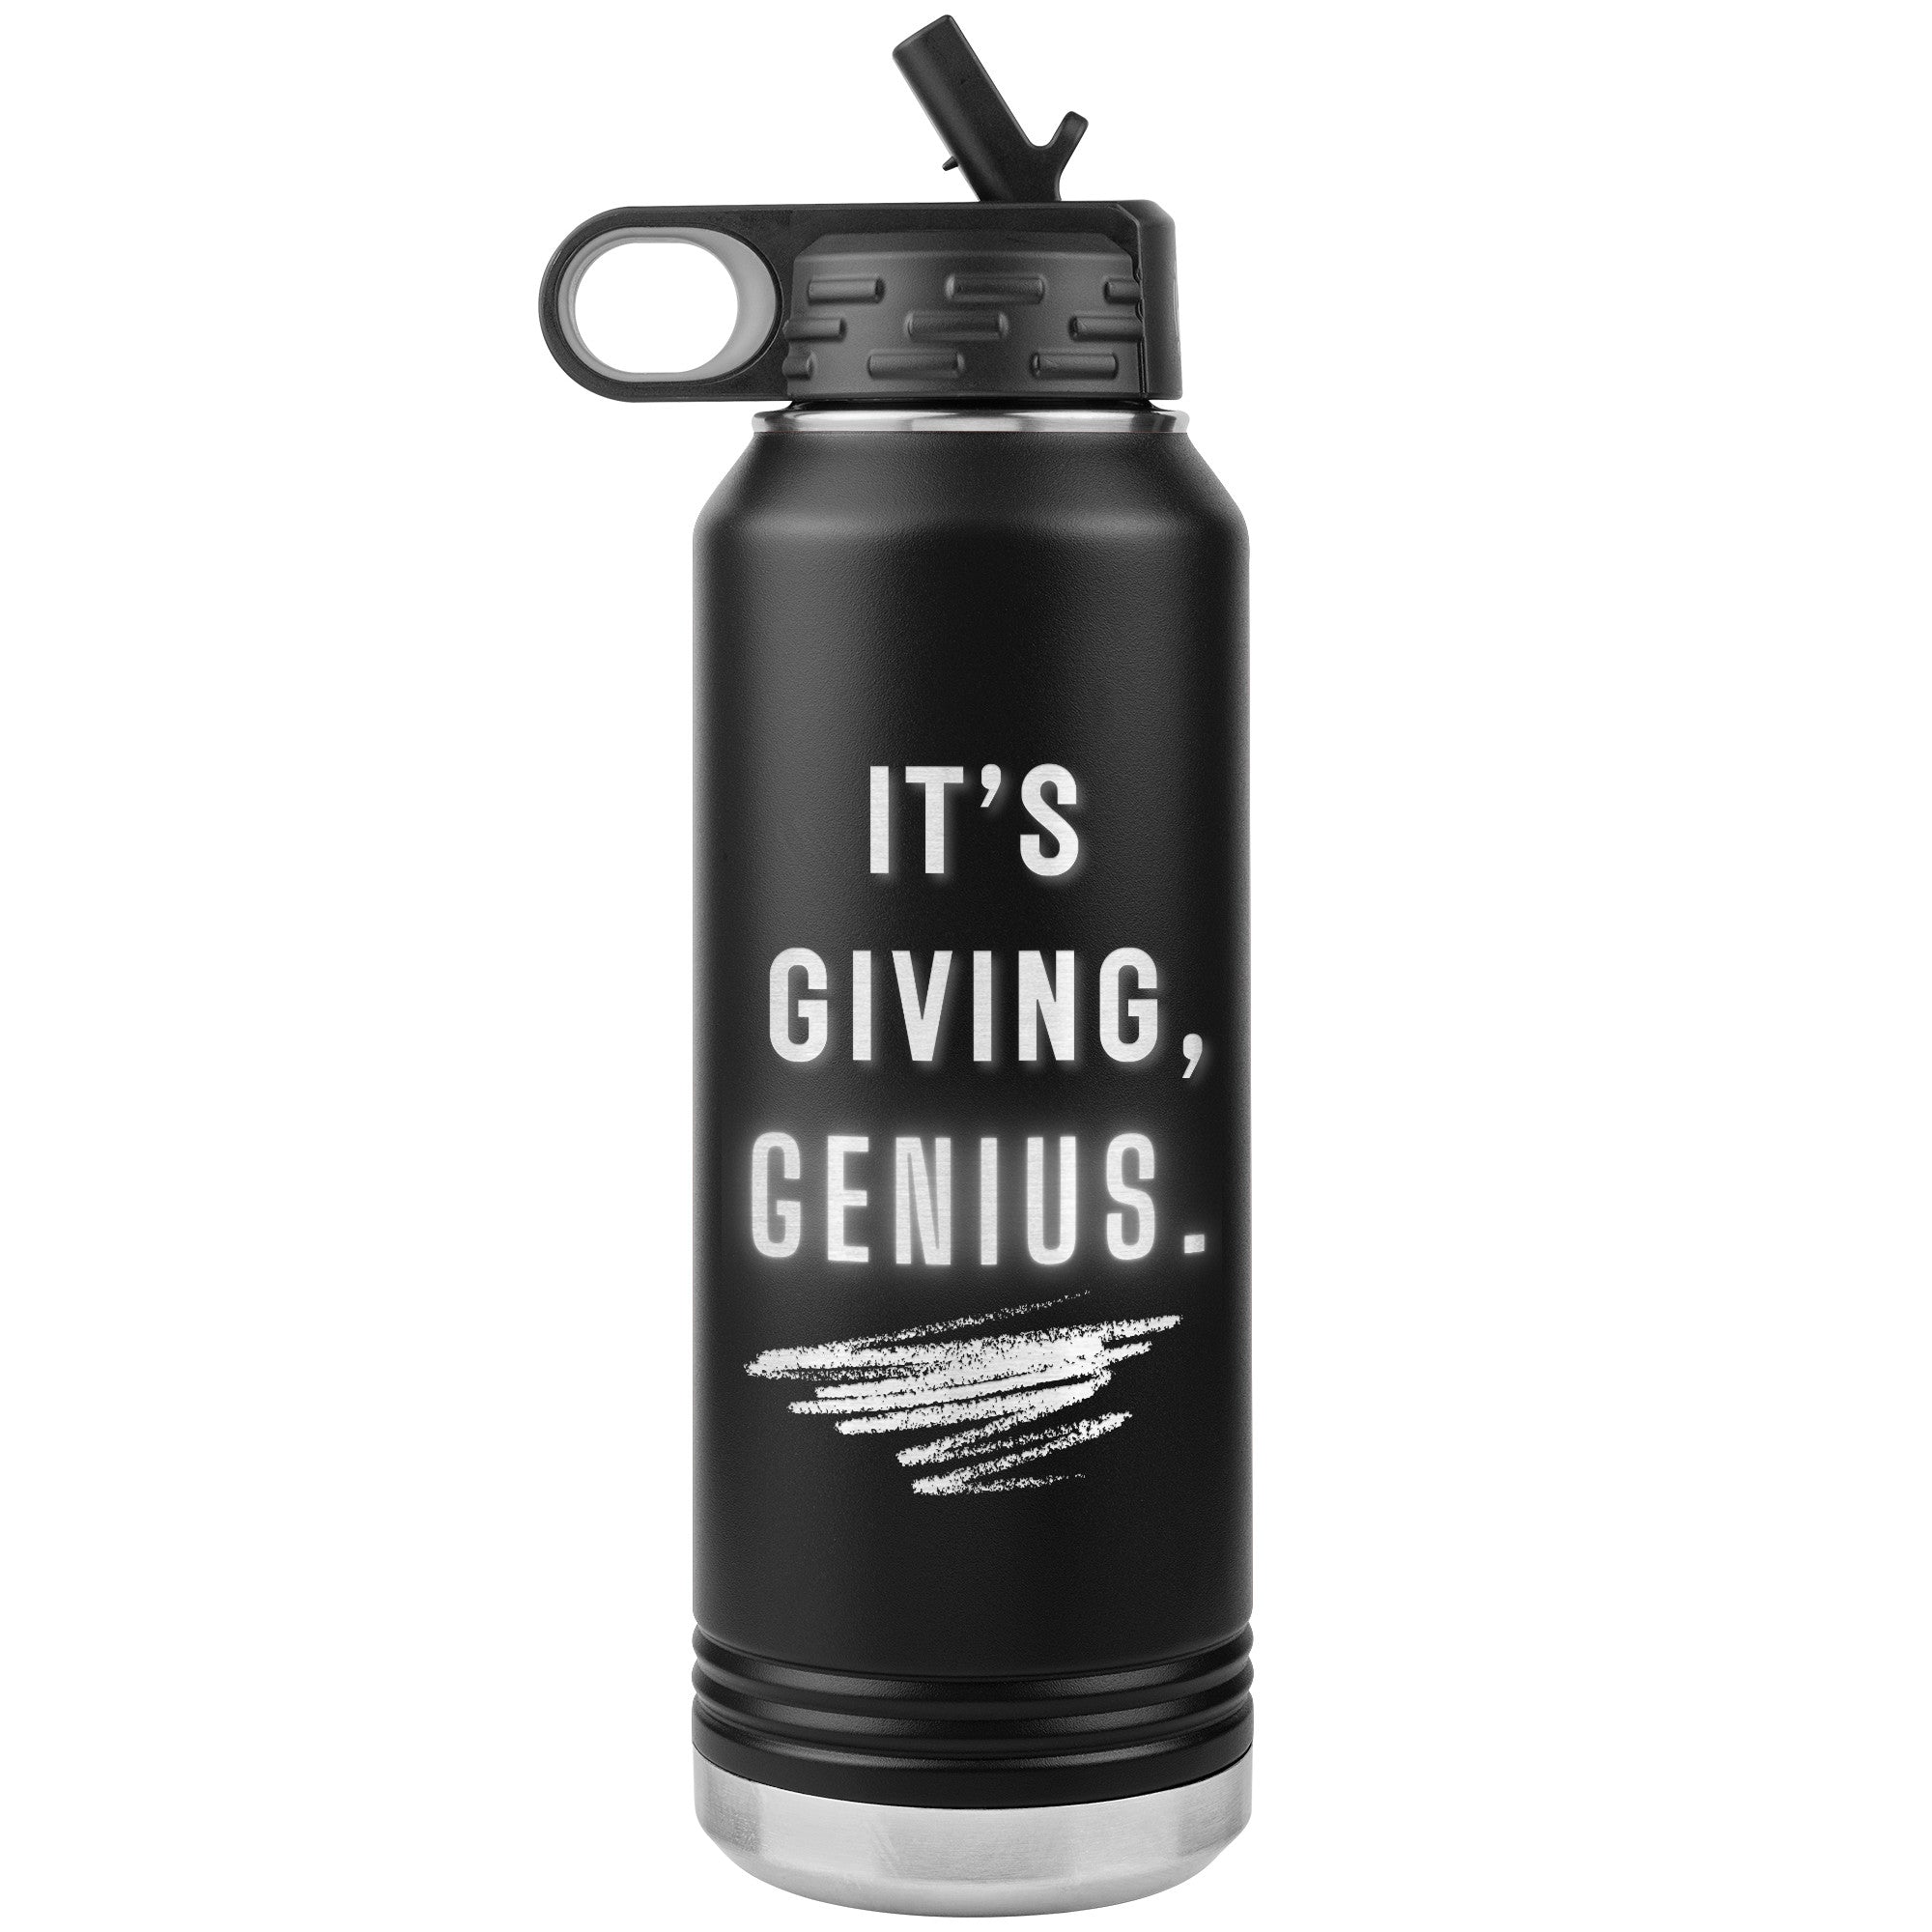 Stainless Steel Affirmation Water Bottle: G-It's Giving, Genius.